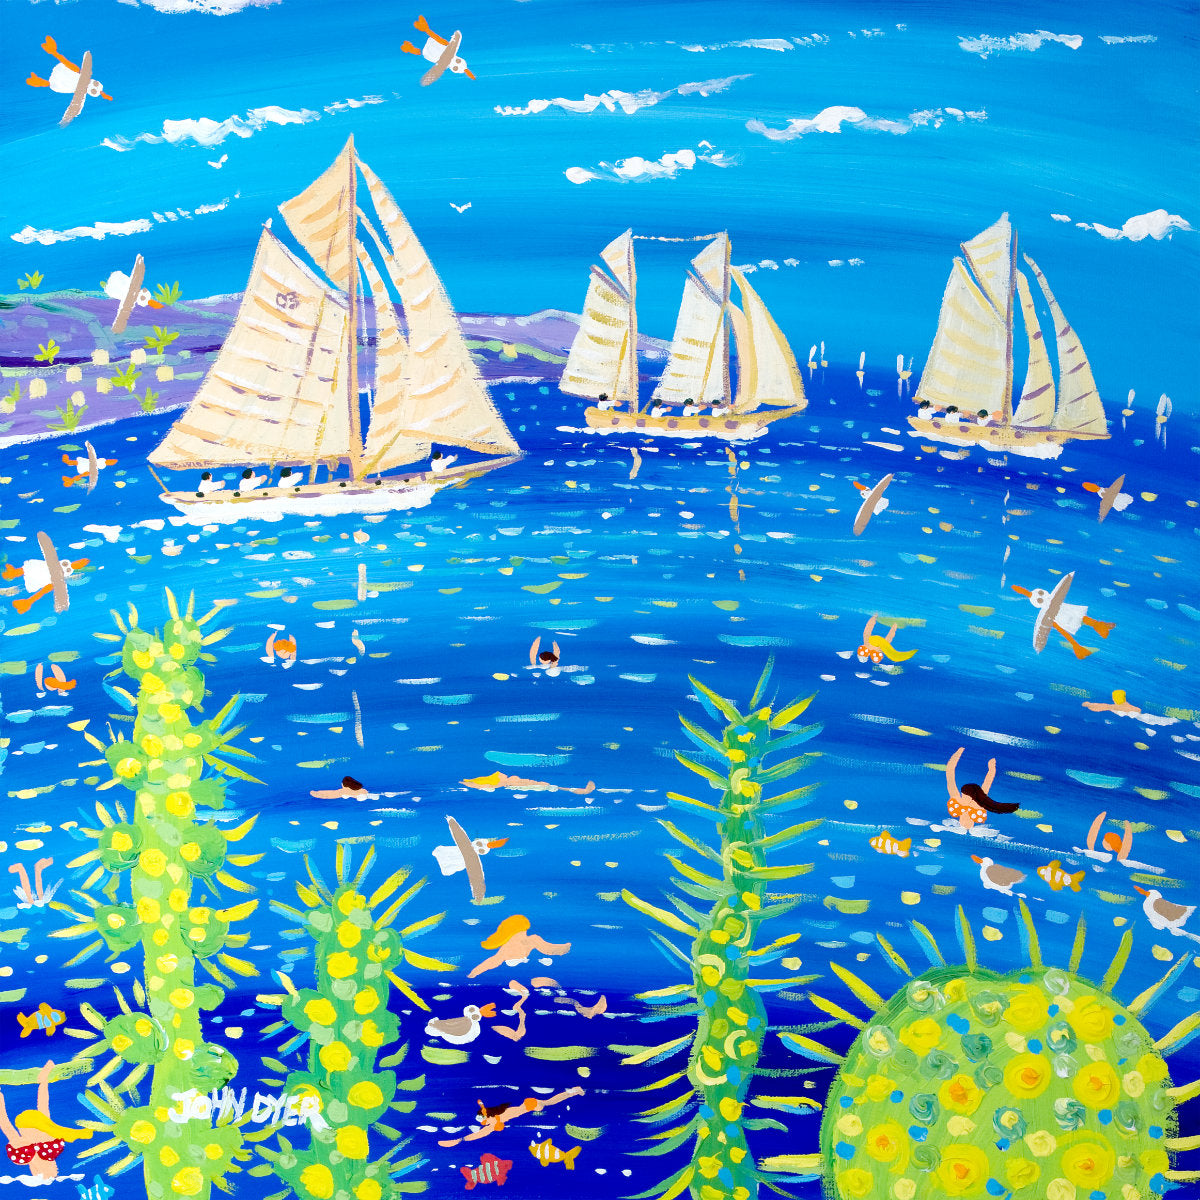 Limited Edition Signed Print by Artist John Dyer. 'Monaco Classic Week'. Classic Yachts and Tall Ships